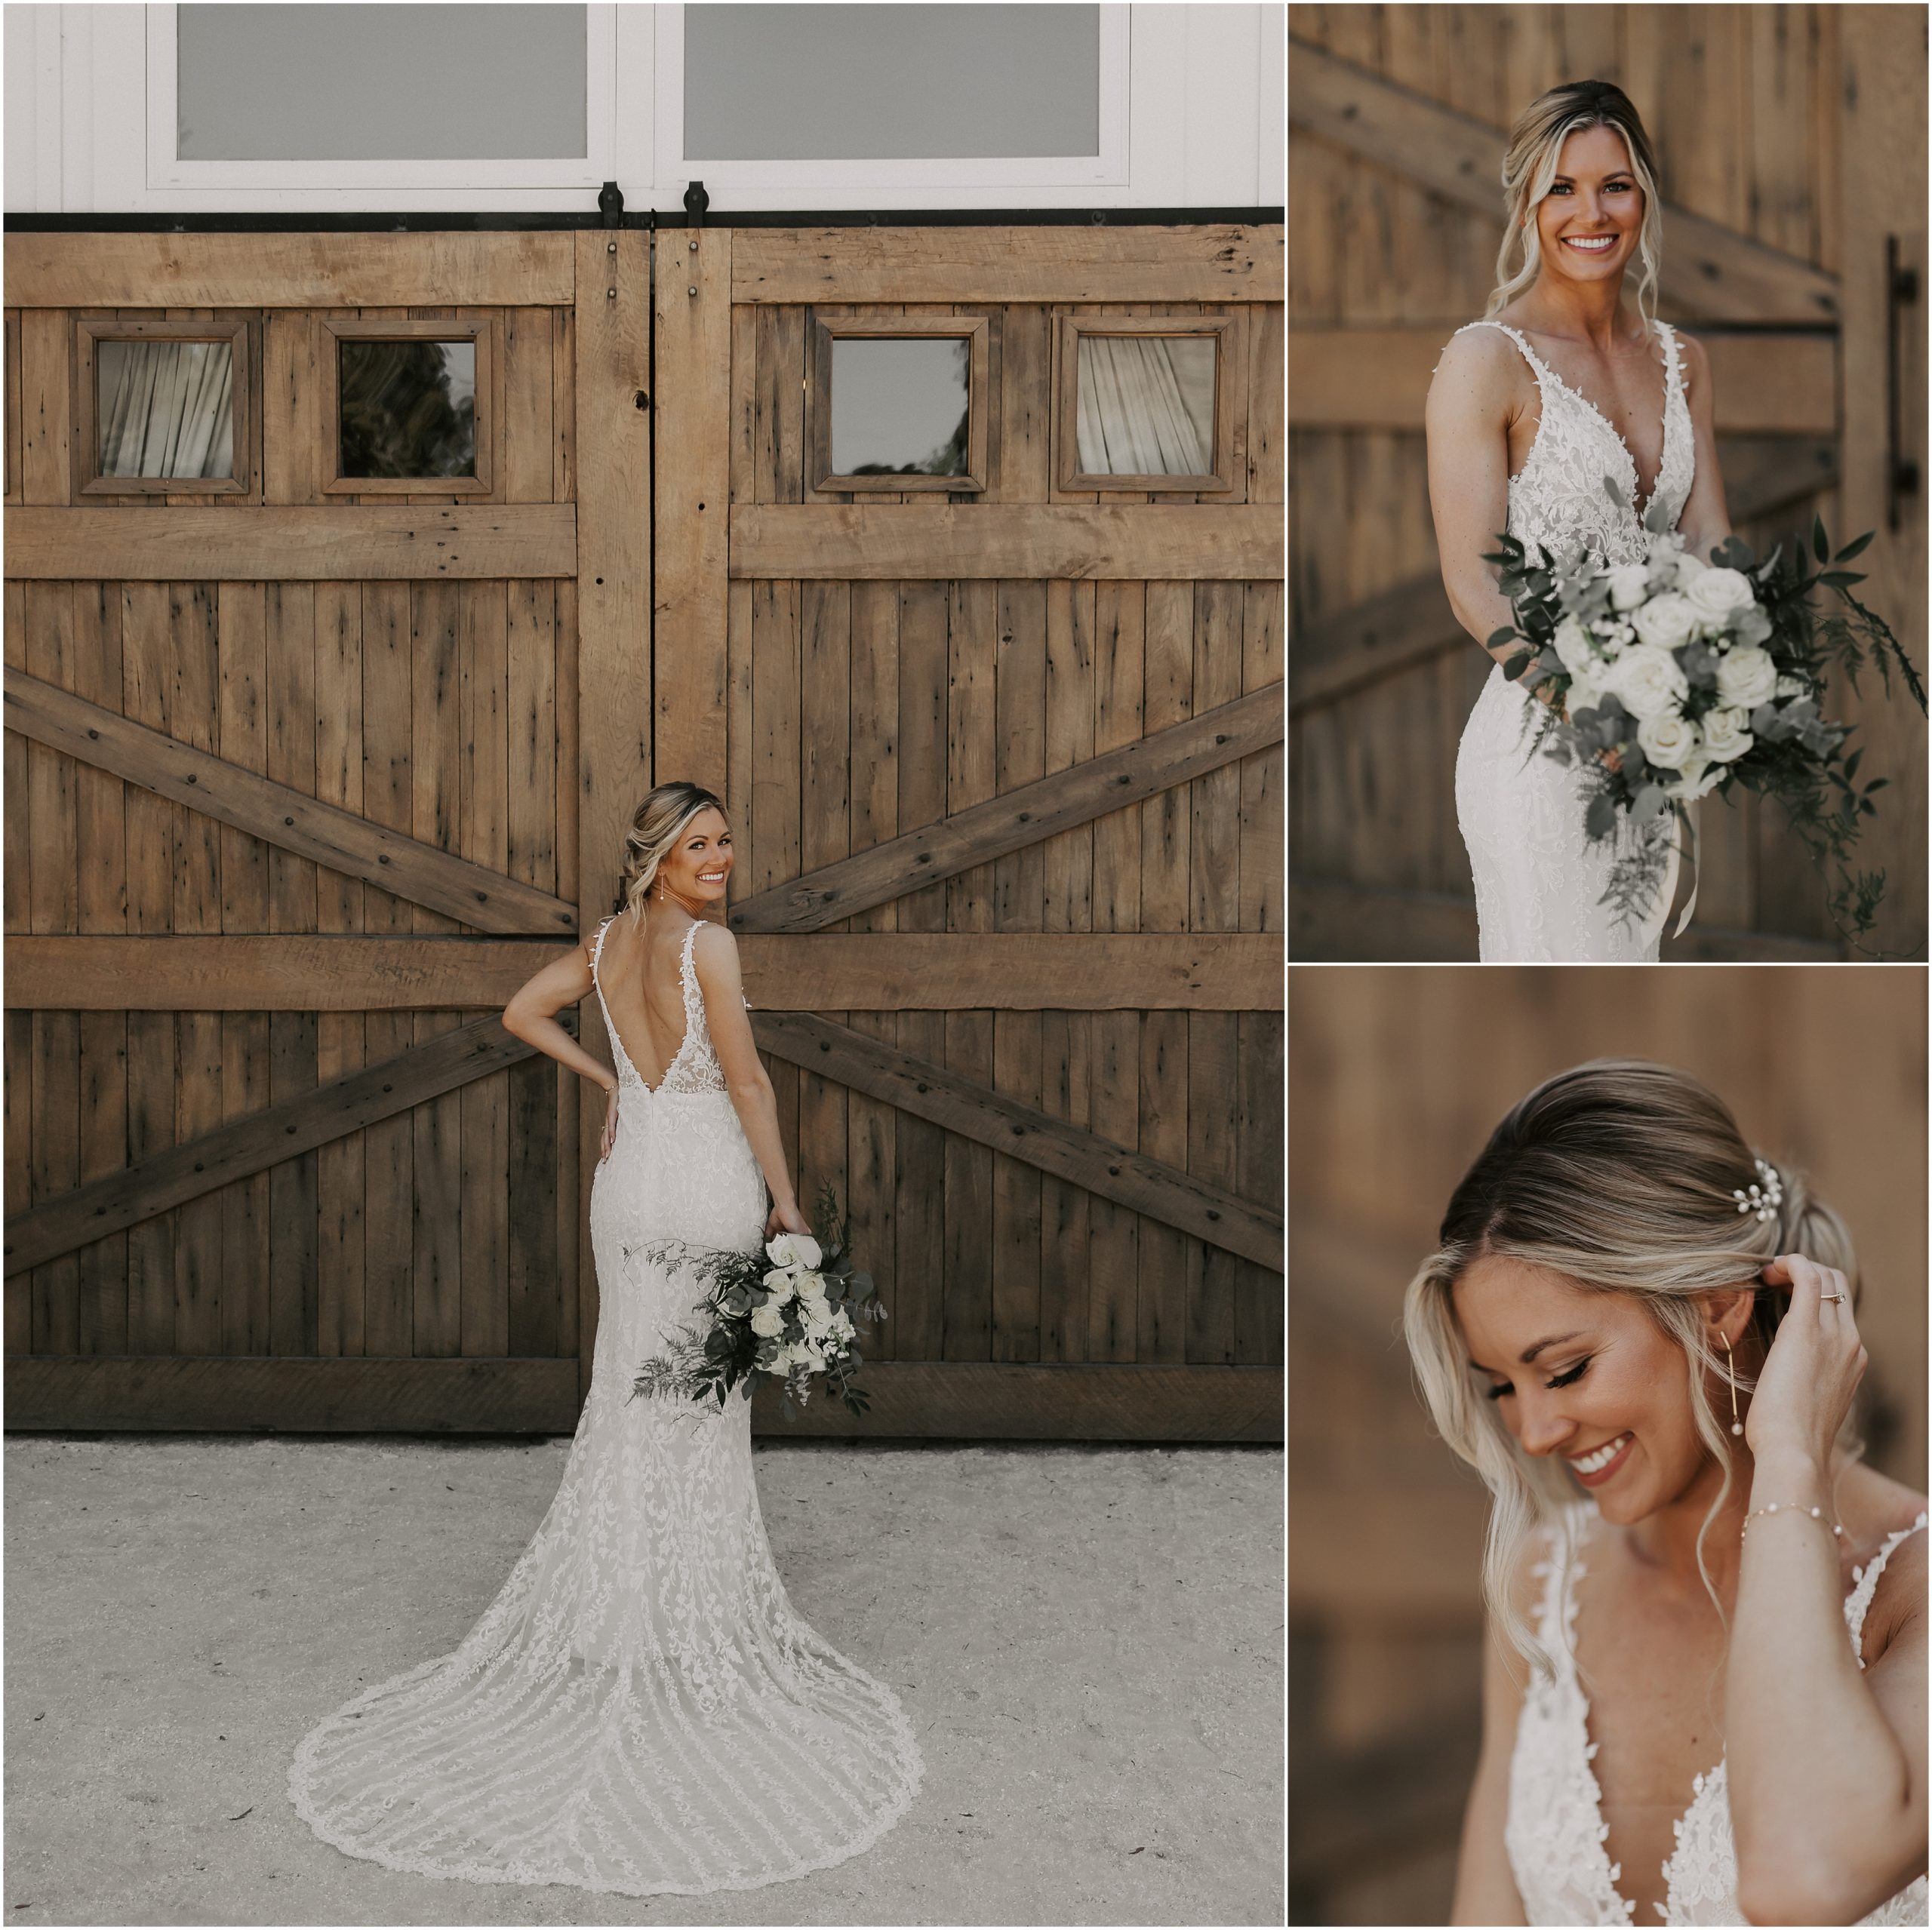 Jenna wears a fresh and organic gown wich match perfectly with her bouquet